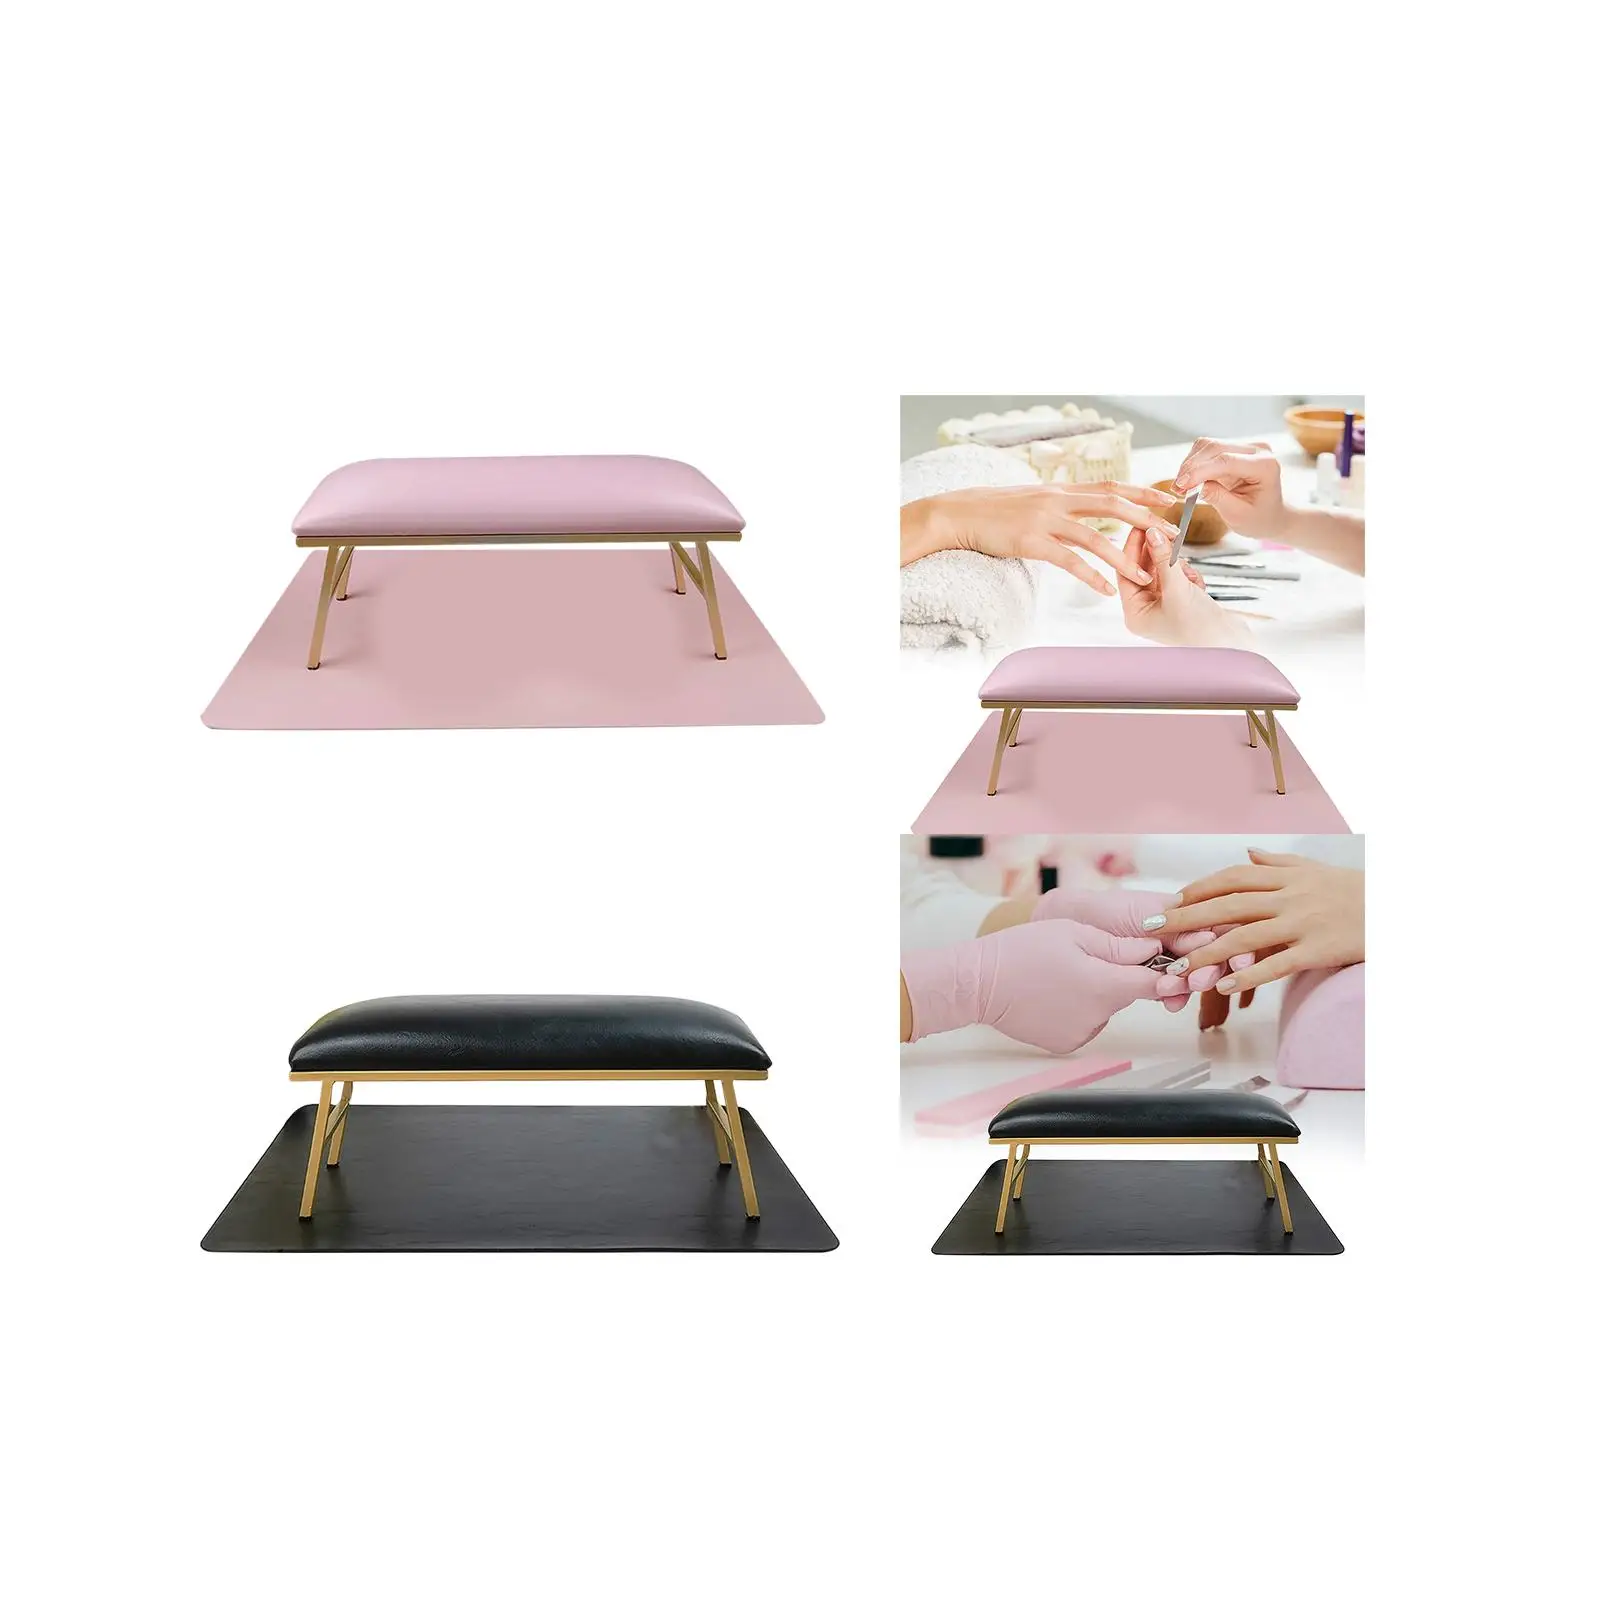 Nail Hand Pillow and Table Mat Set Accessories Table Soft Hand Cushion Nail Hand Rest Cushion for Home Manicurist Salon Arm